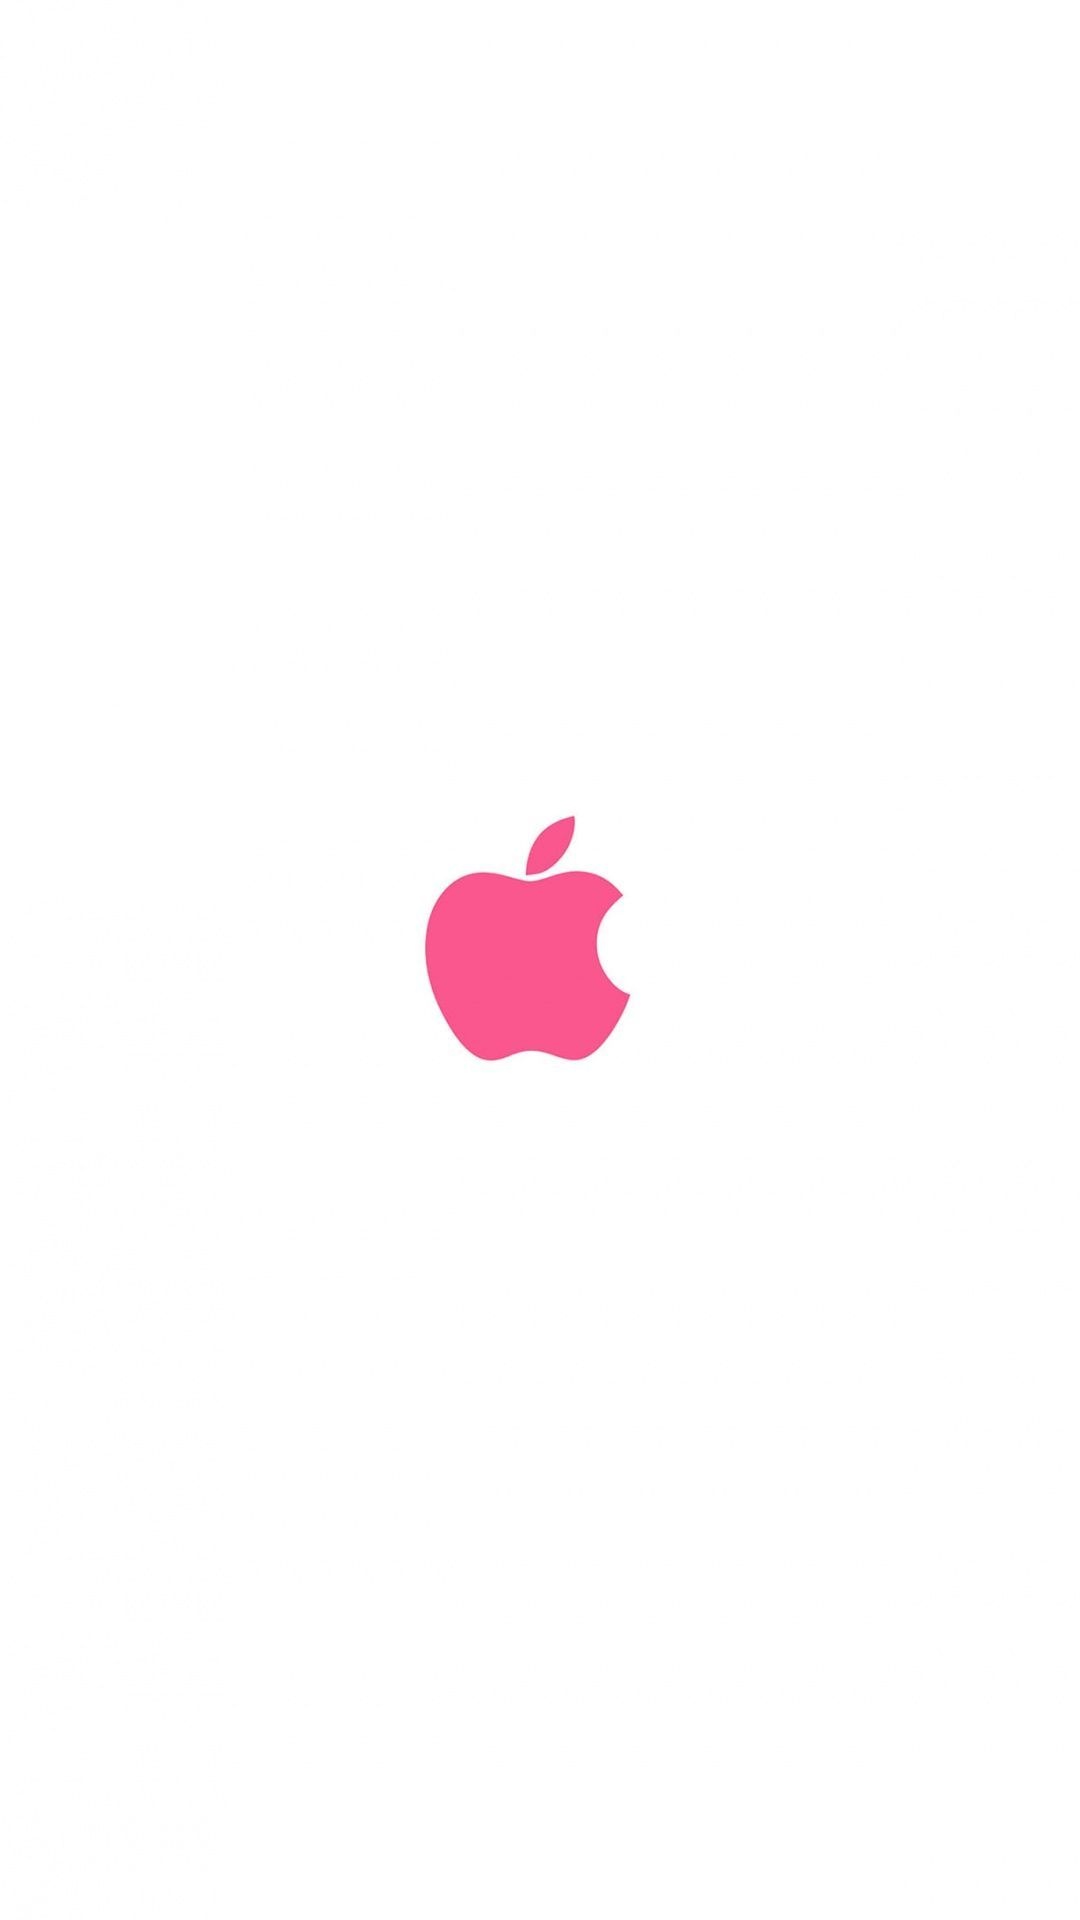 iMac Logo, Pink Apple logo wallpapers, Playful and vibrant, Expressive and unique, 1080x1920 Full HD Phone